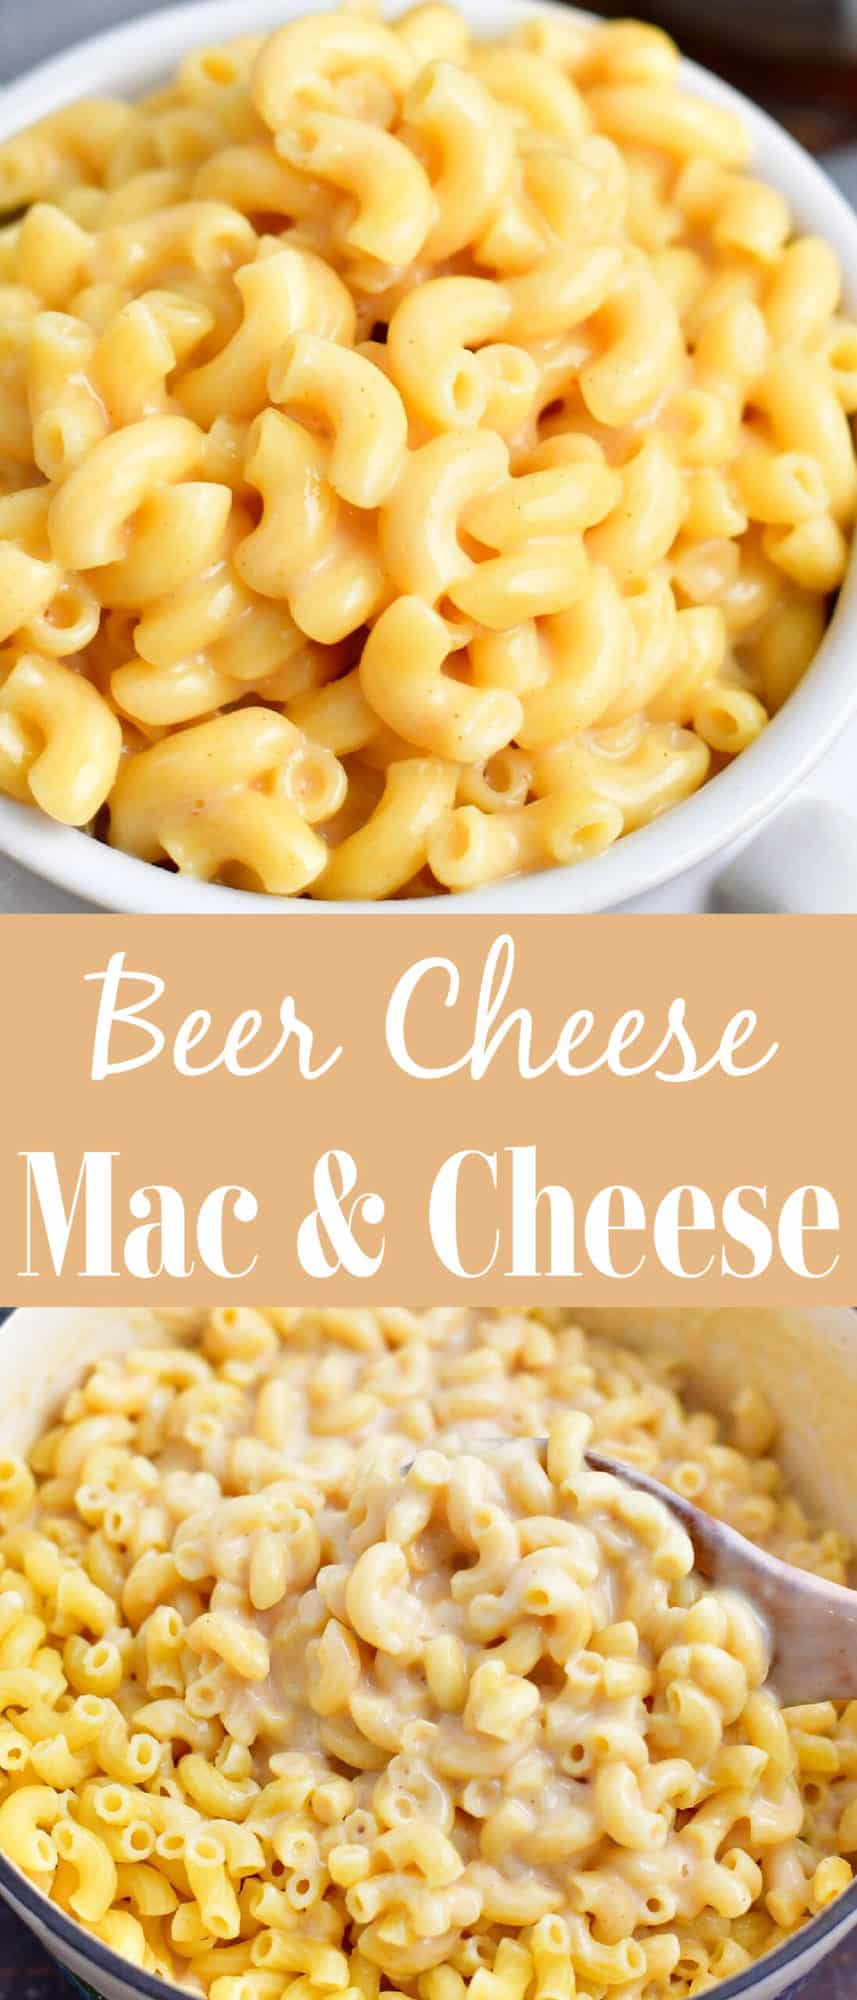 titled photo collage (and shown): beer cheese mac and cheese